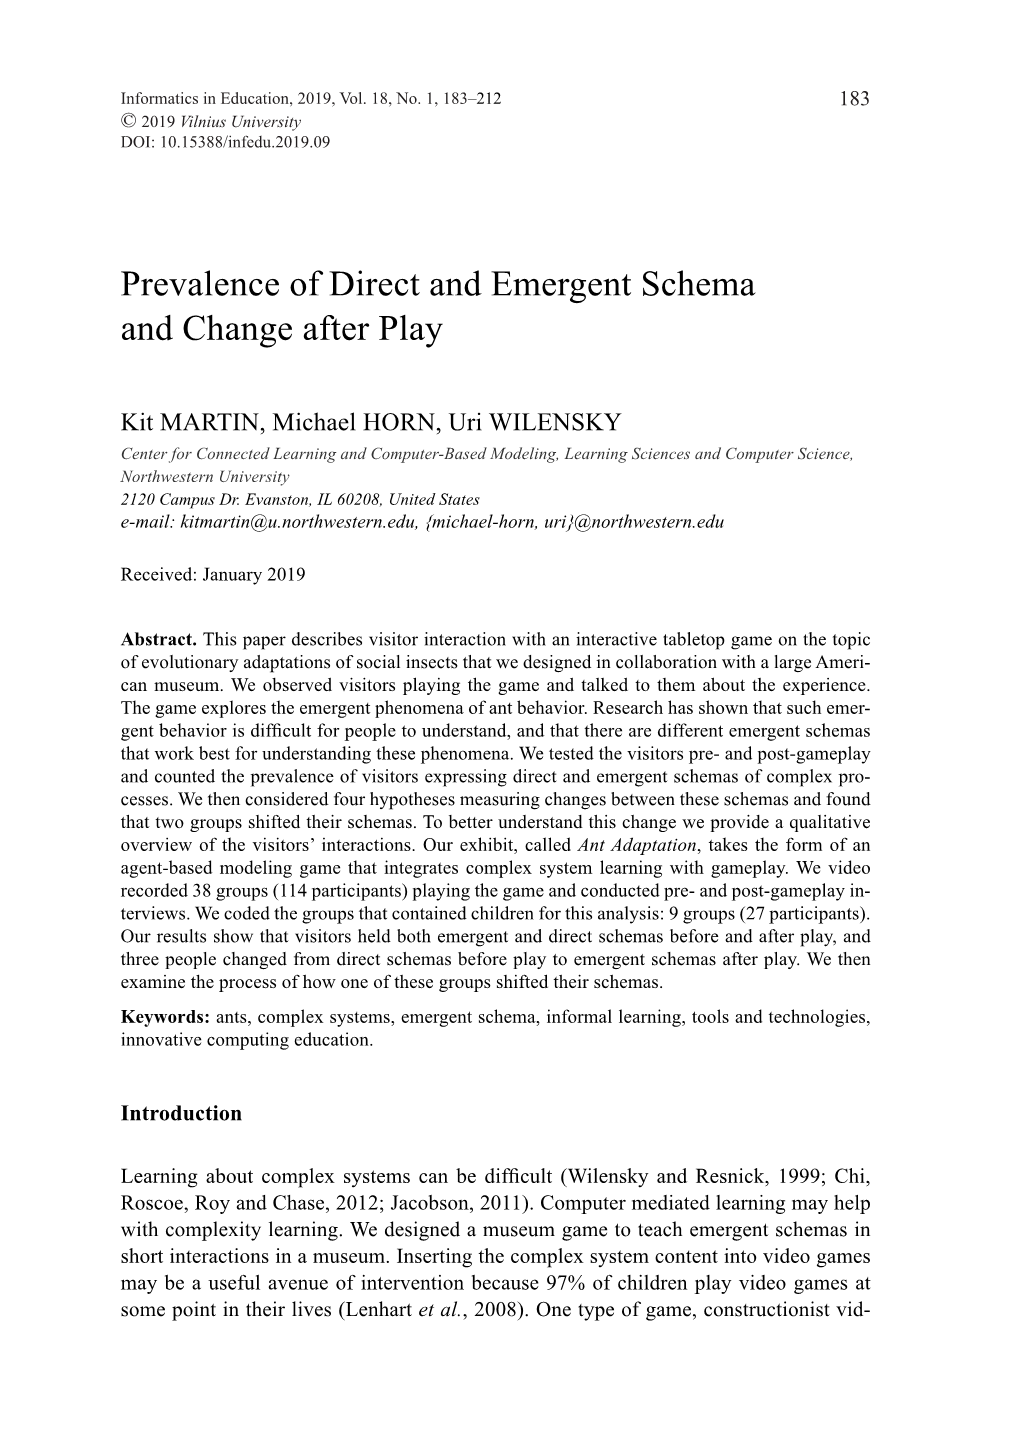 Prevalence of Direct and Emergent Schema and Change After Play